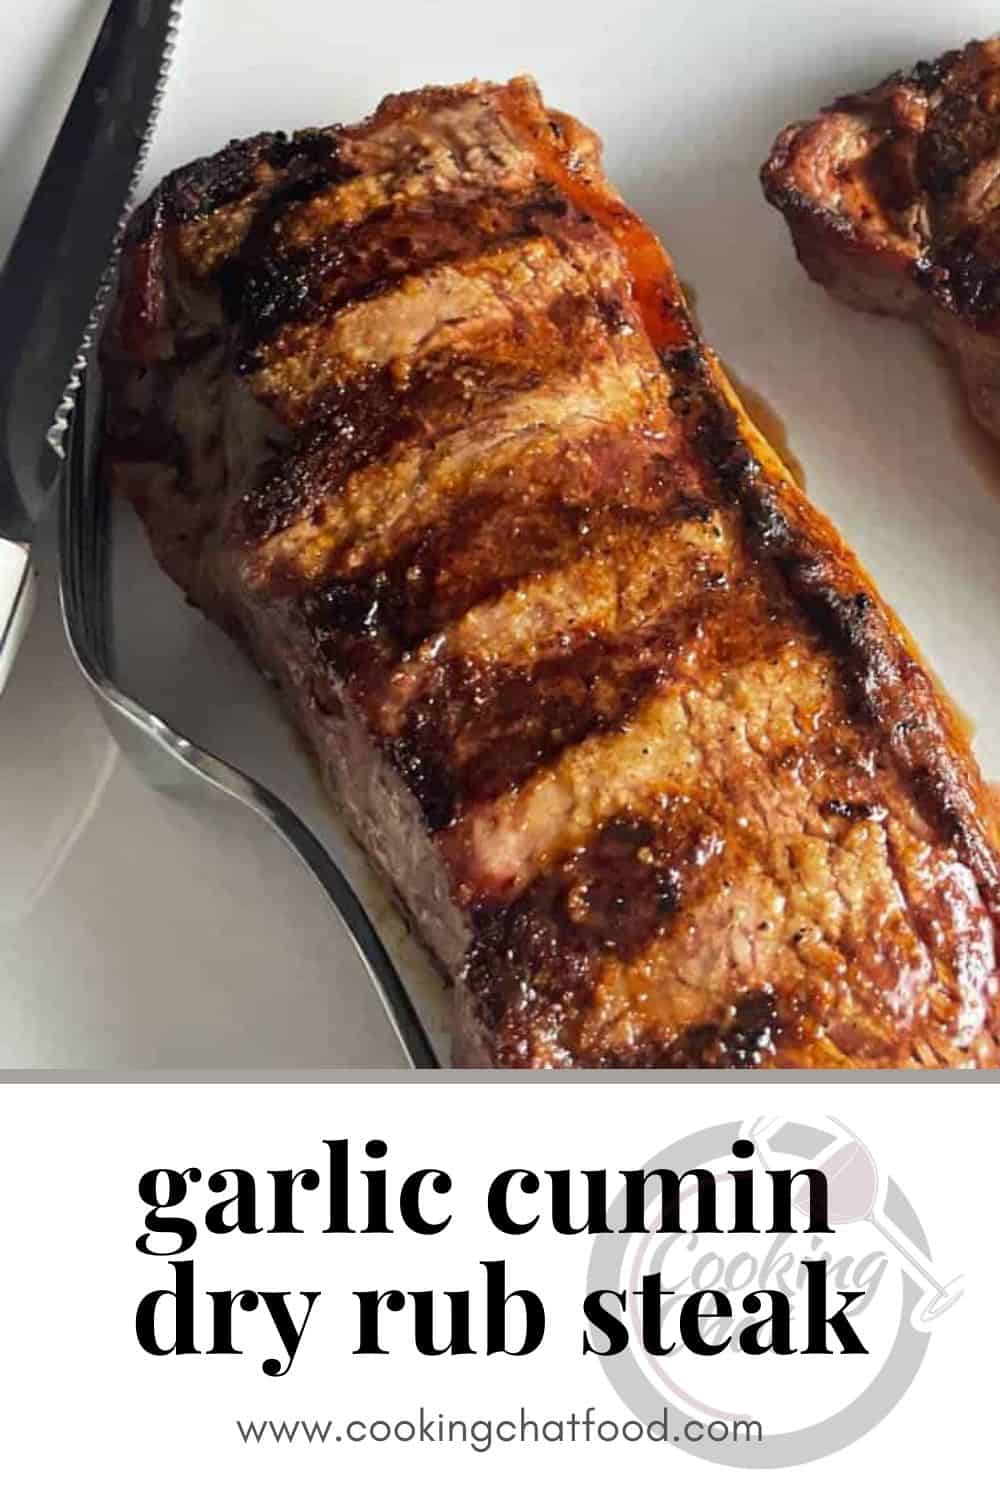 grilled NY strip steak on a white platter, with text underneath that says garlic cumin dry rub steak.